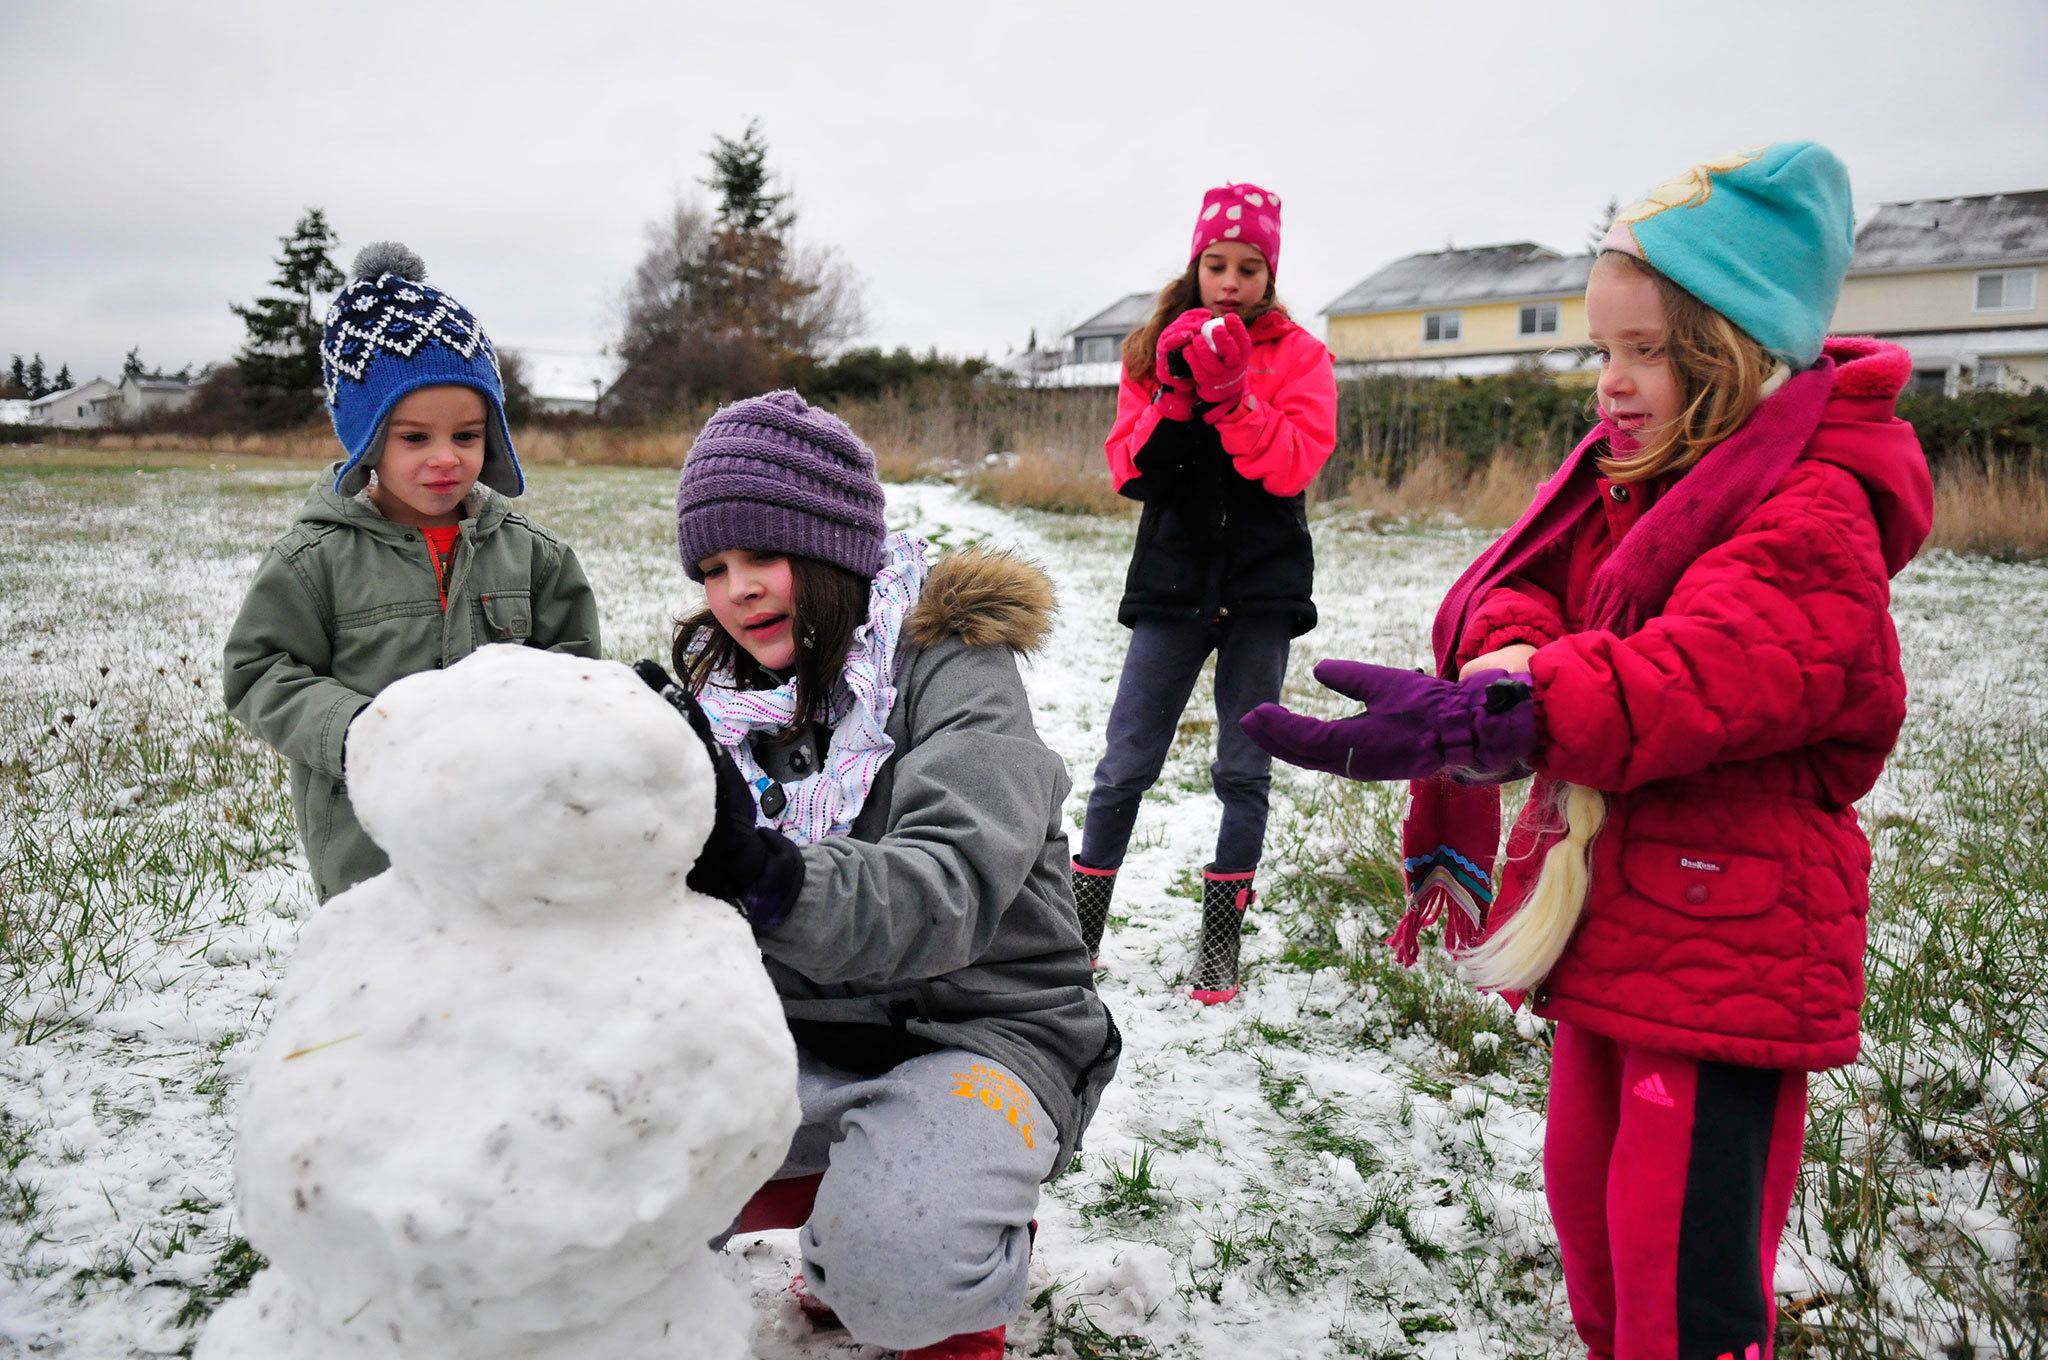 Photo by Michael Watkins/Whidbey News-Times                                Wyatt Waite, Grace Waite, Maggie Waite and Isabel Waite take advantage of the first snow of the season in Oak Harbor Friday. Meteorologists predicted the snow earlier in the week but it finally fell Thursday night into Friday morning. About two inches of snow fell on North Whidbey. Oak Harbor schools started two hours late and personnel at Naval Air Station Whidbey Island were asked to arrive two hours later than normal.